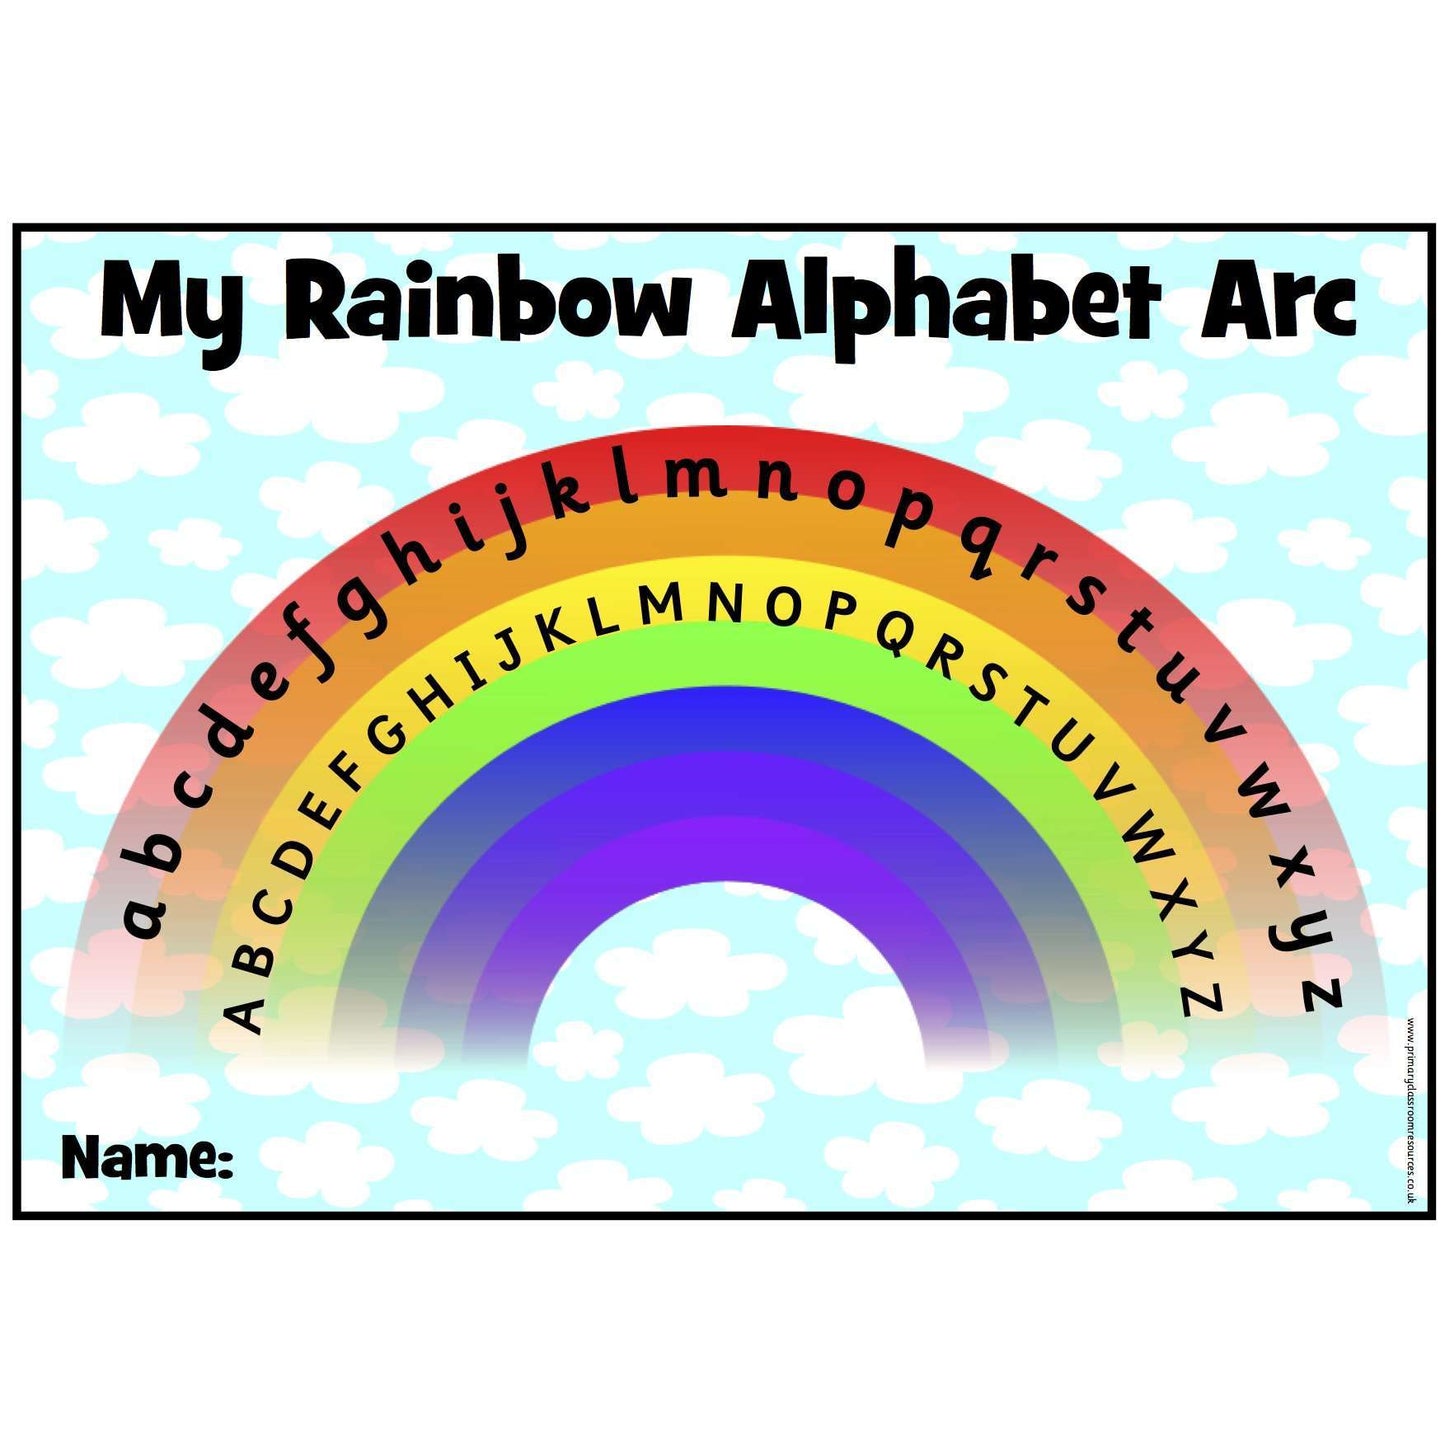 My Rainbow Alphabet Arc -  Upper and Lower Case:Primary Classroom Resources